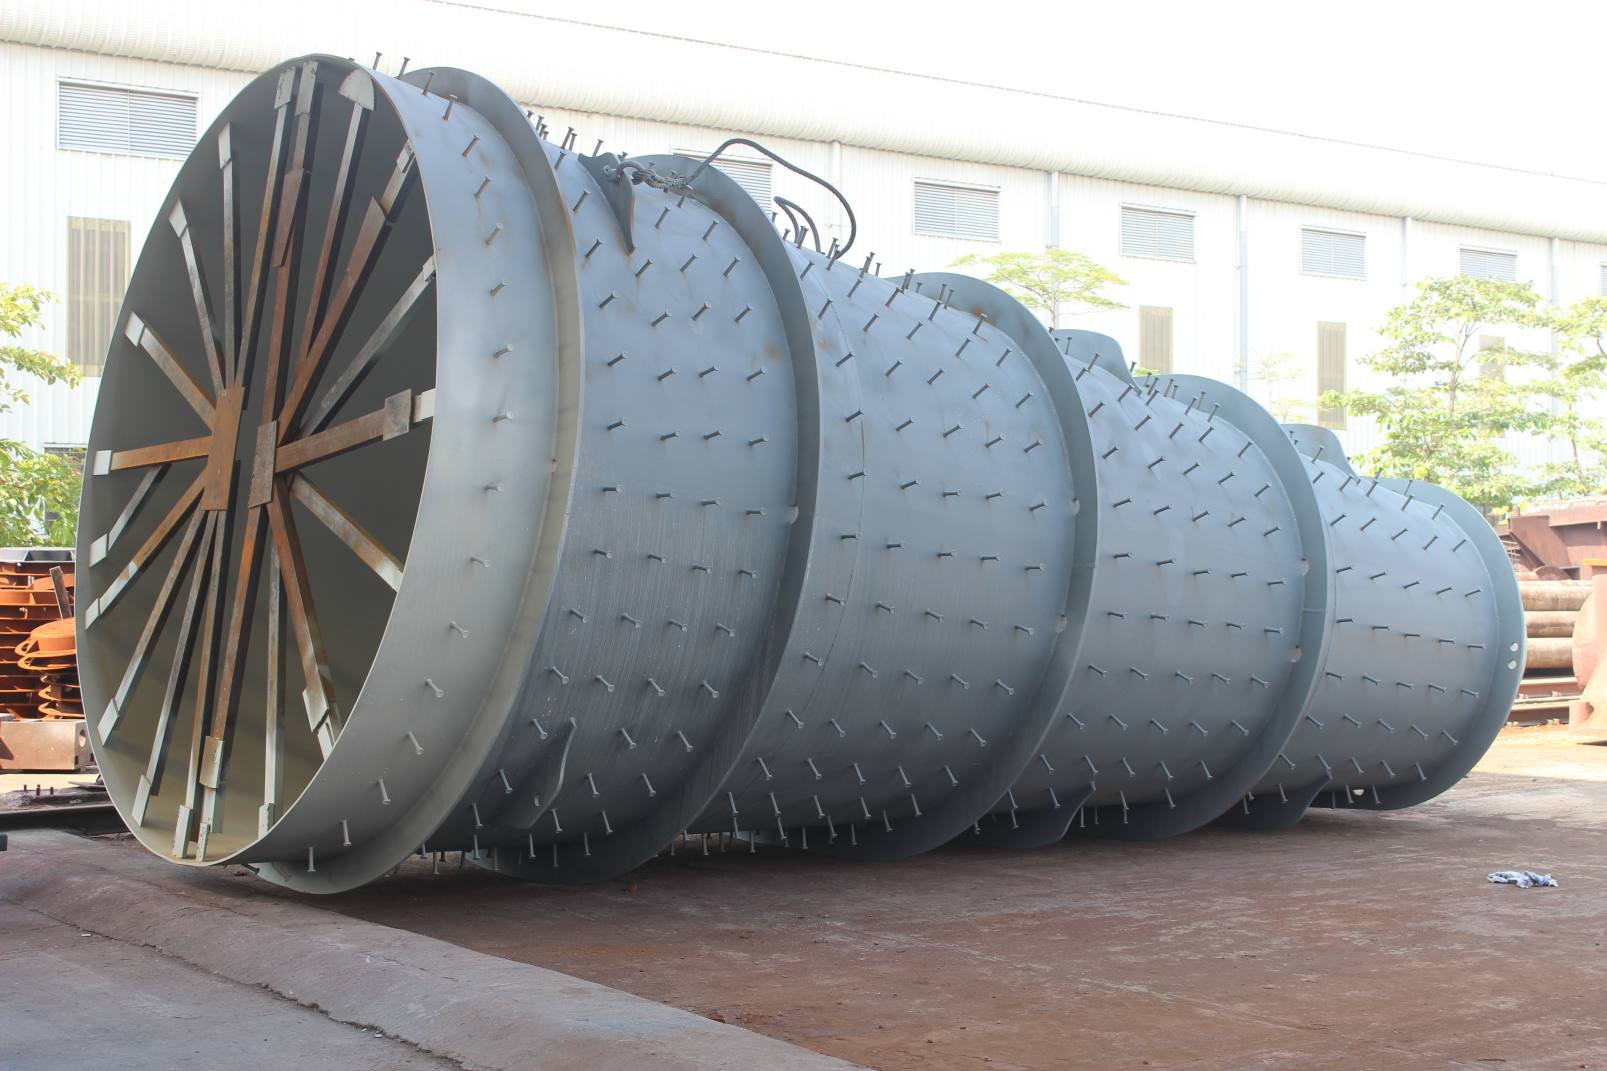 Draft tube liner - Hydropower projects